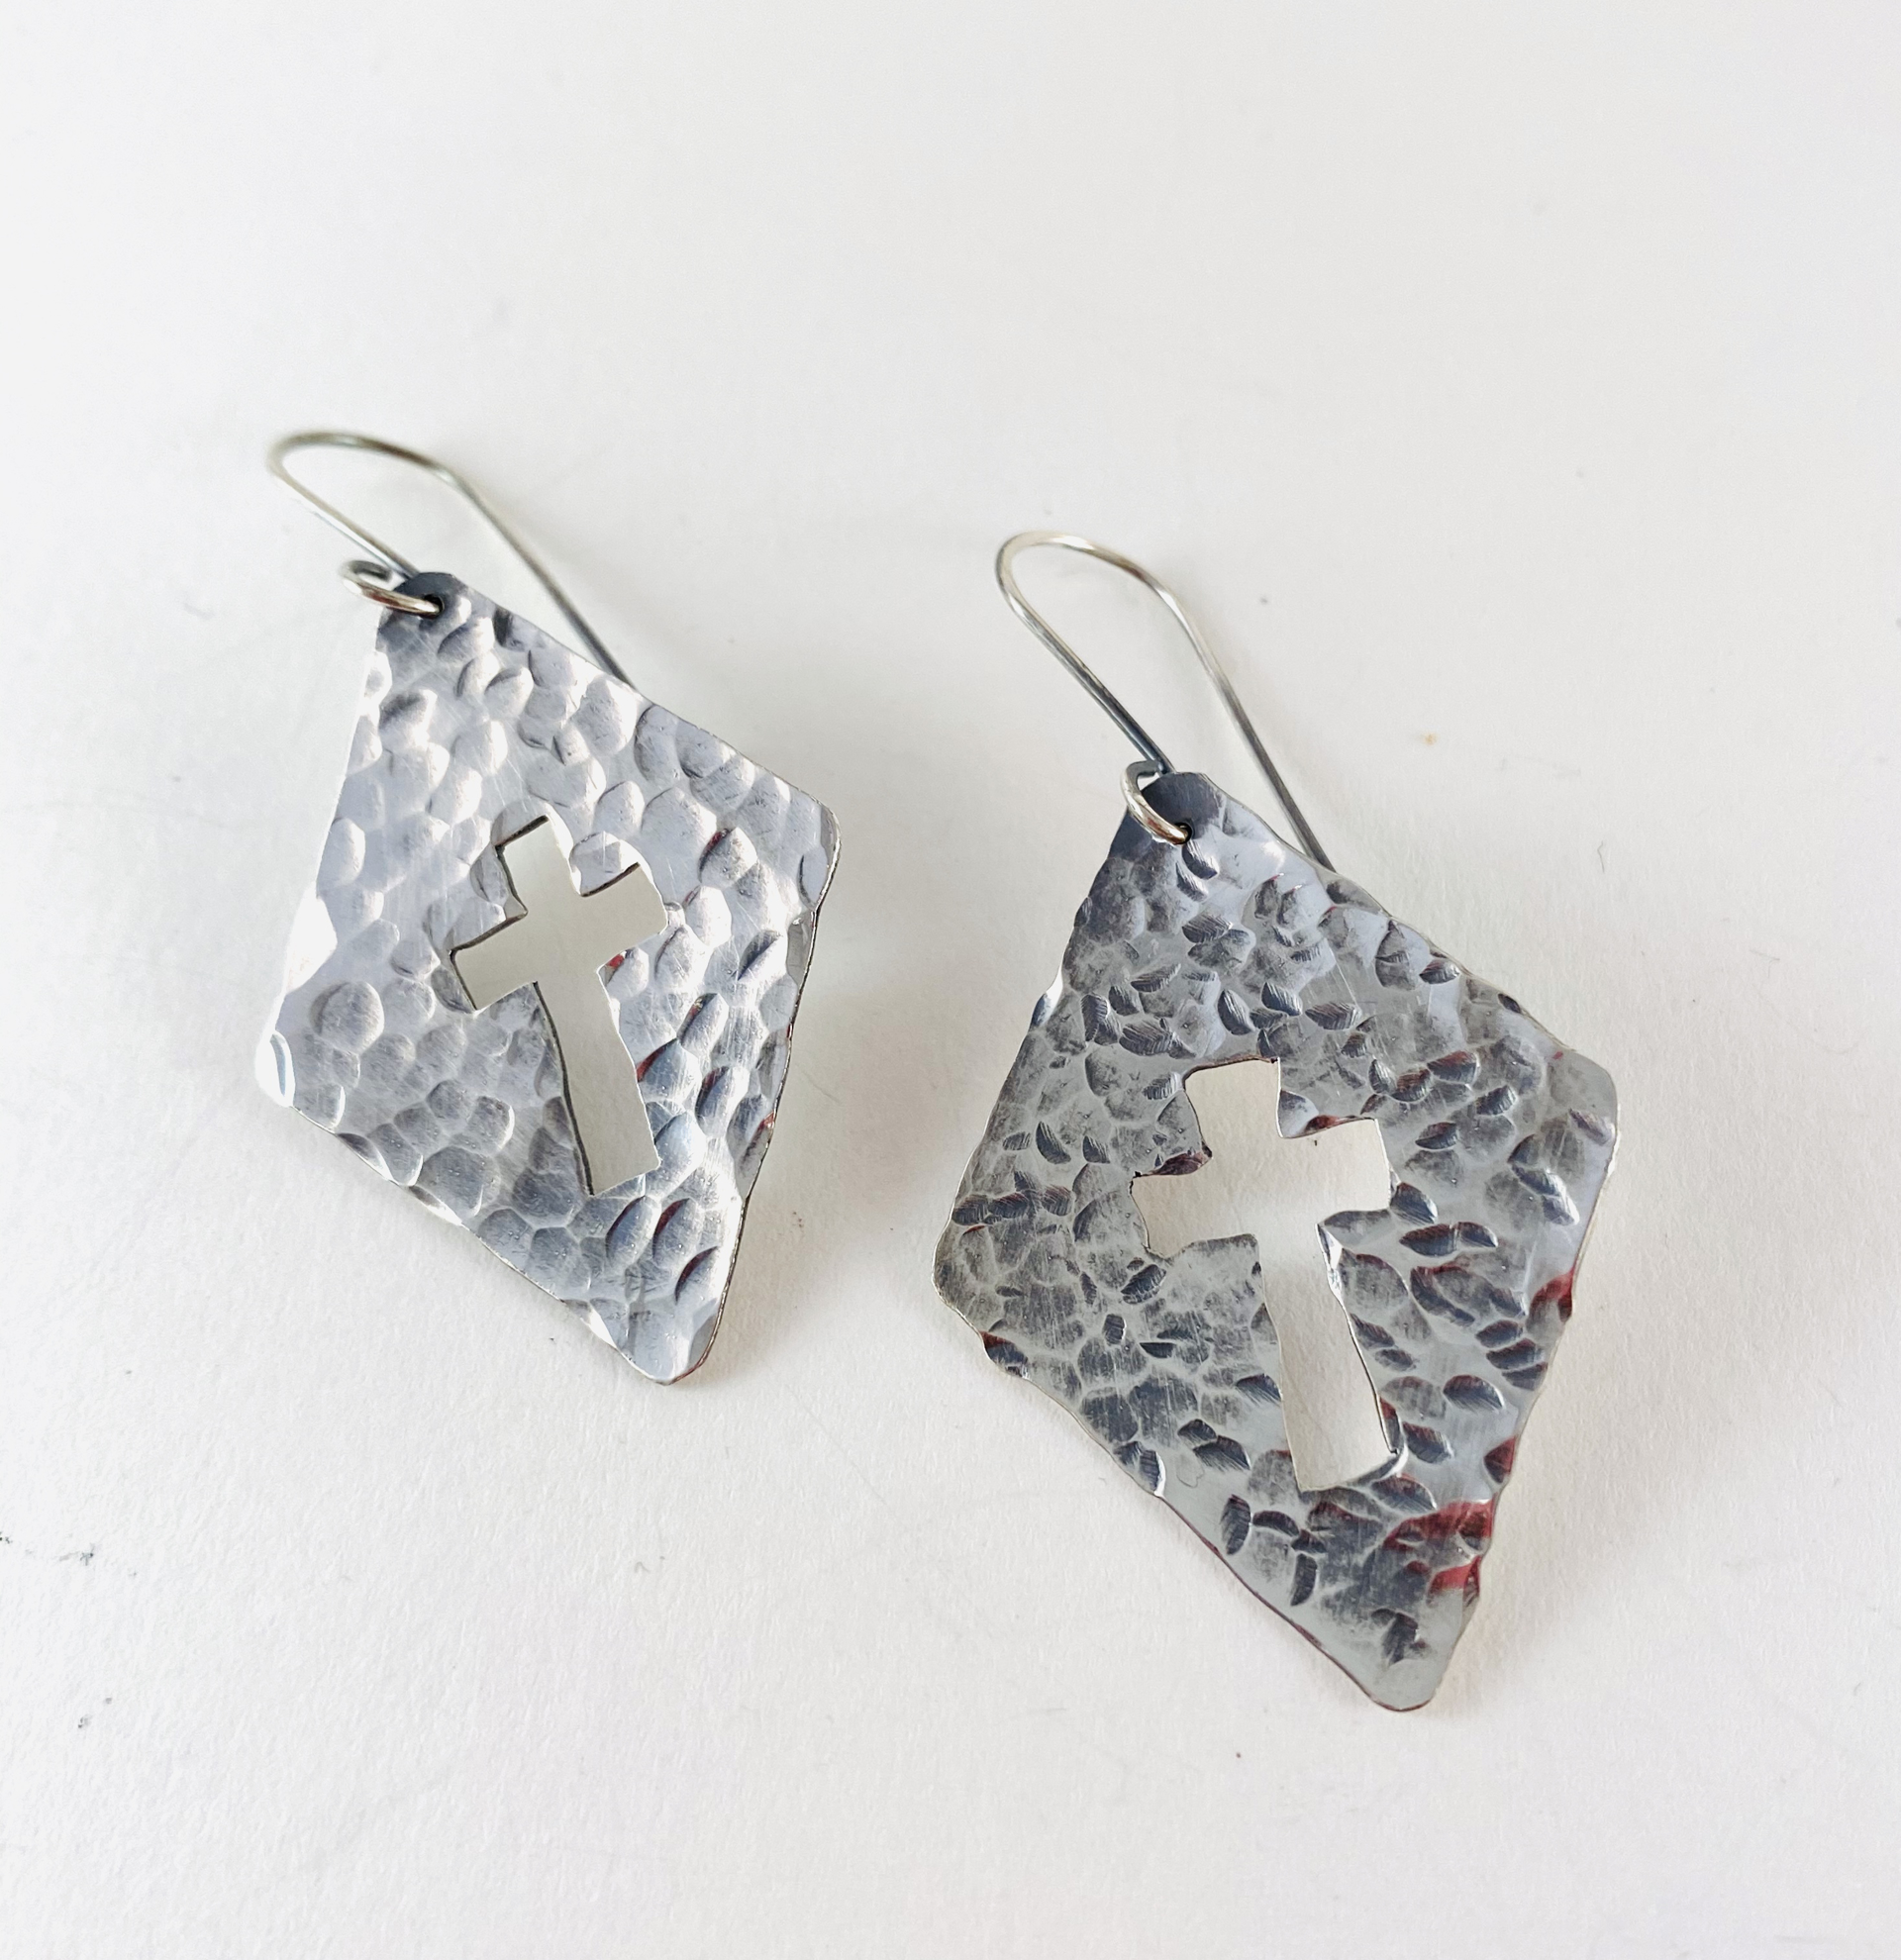 Hand Hammered and Cross Cut Out Silver Earrings AB20-11 by Anne Bivens